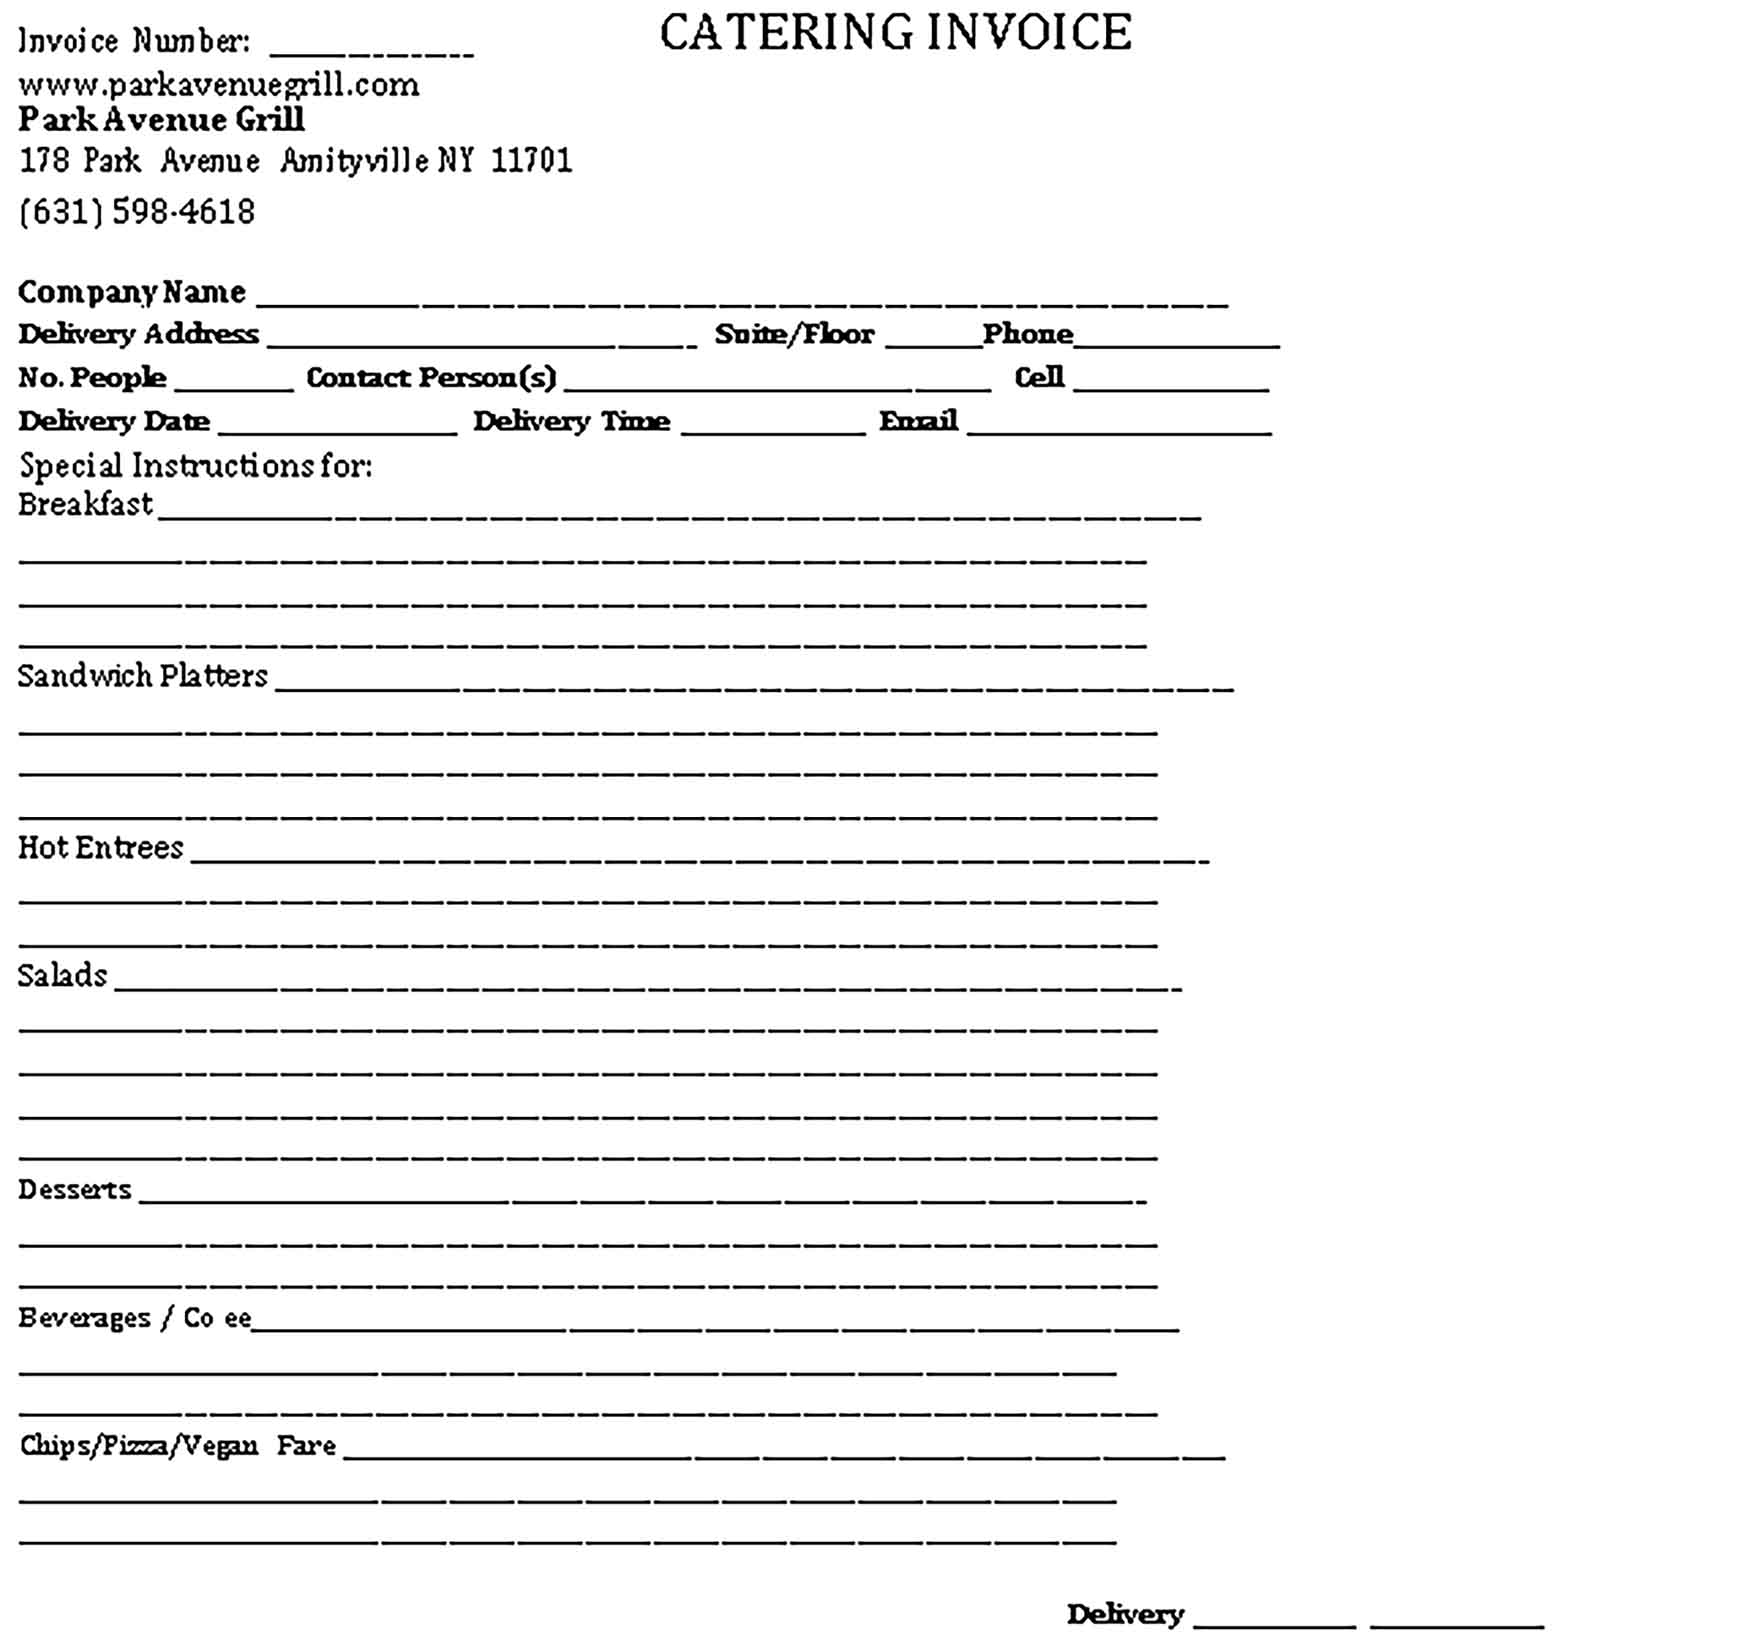 Sample Catering Receipt Templates